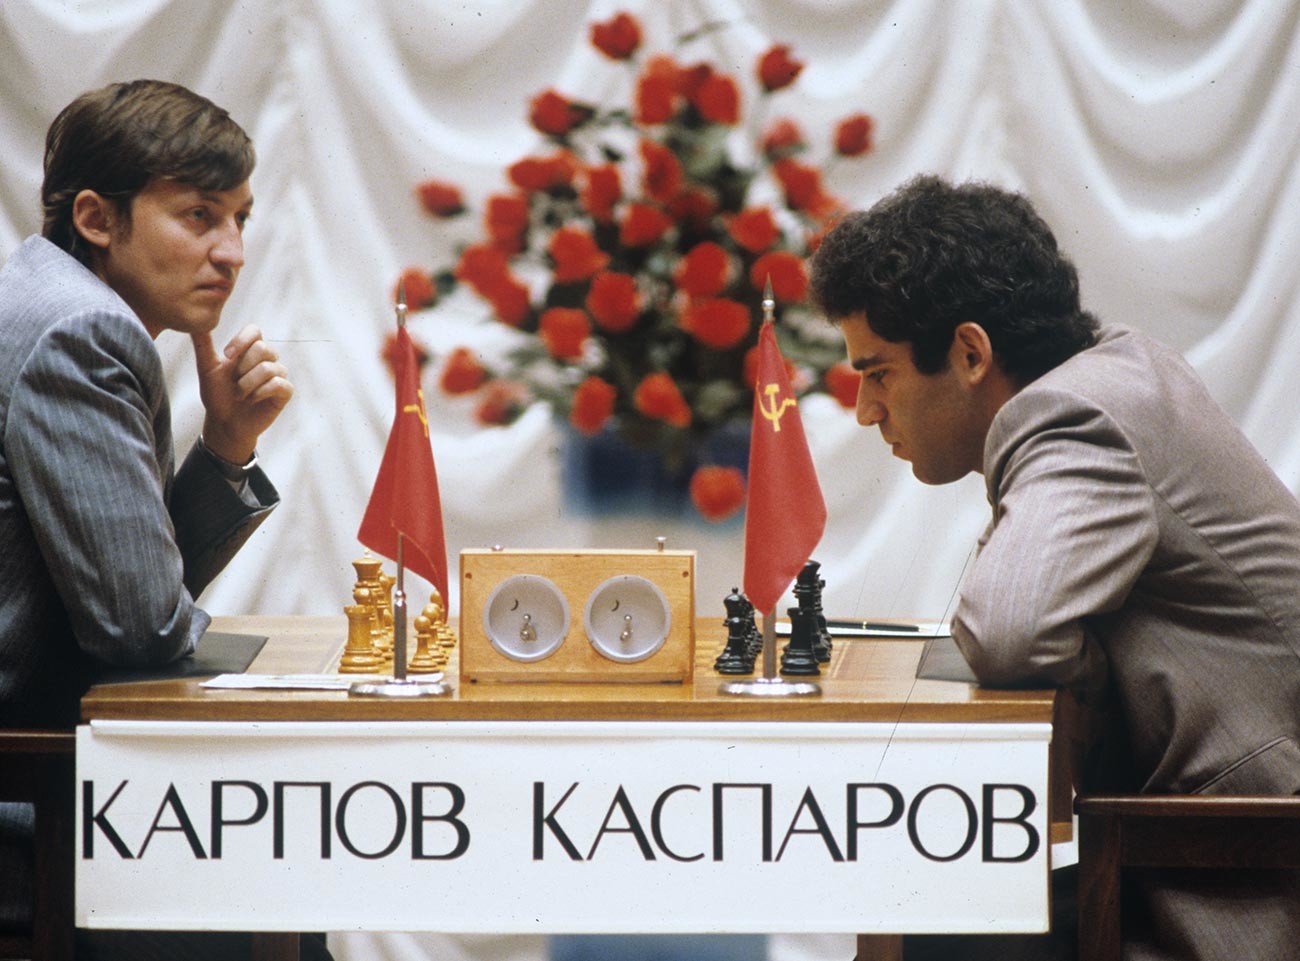 7 Russian chess LEGENDS who really played big (PHOTOS) - Russia Beyond